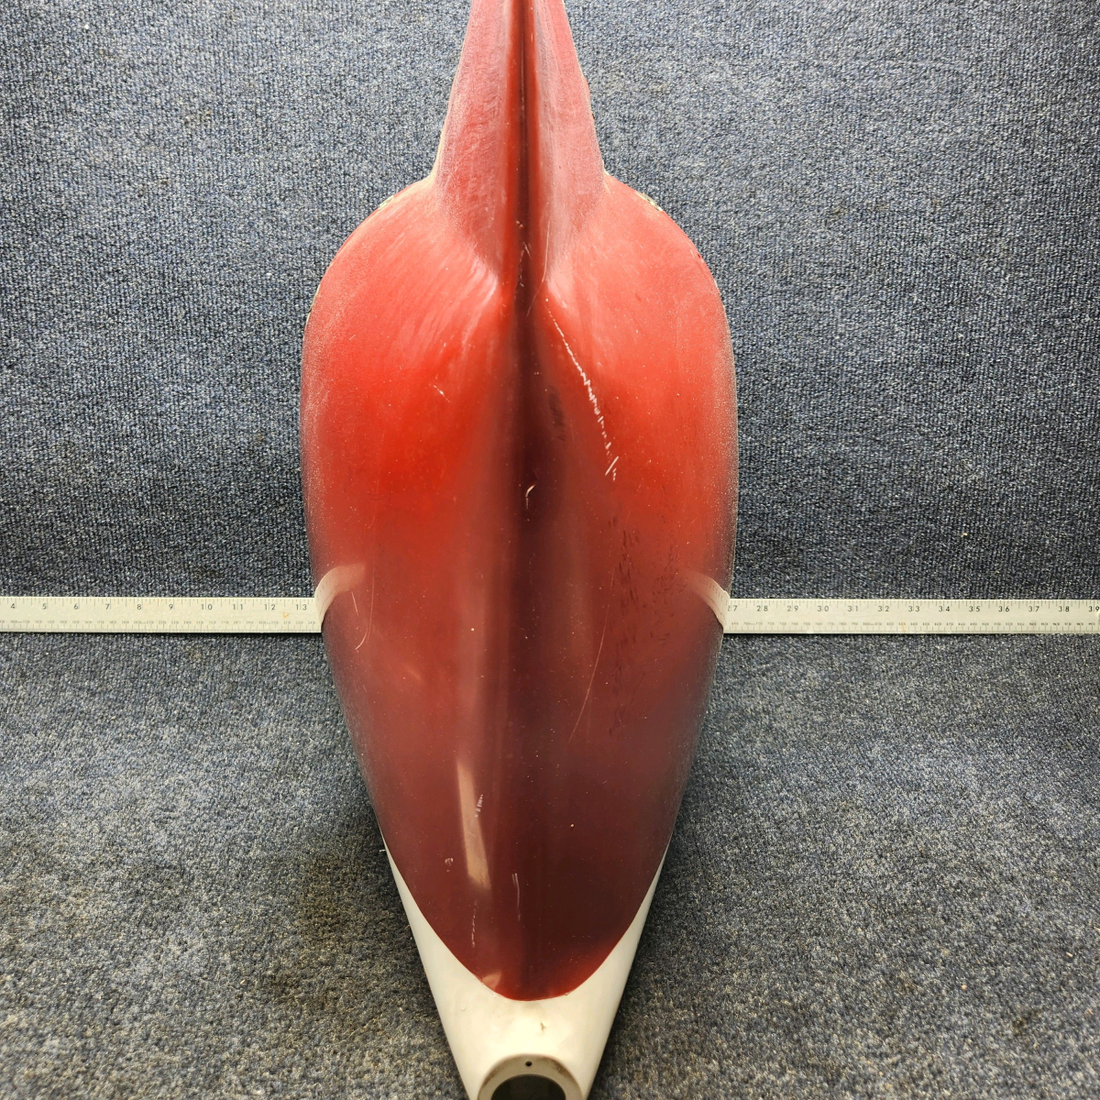 Used aircraft parts for sale, 78912-011 Piper PA32RT-300 TAILCONE STINGER-SEE DETAILS